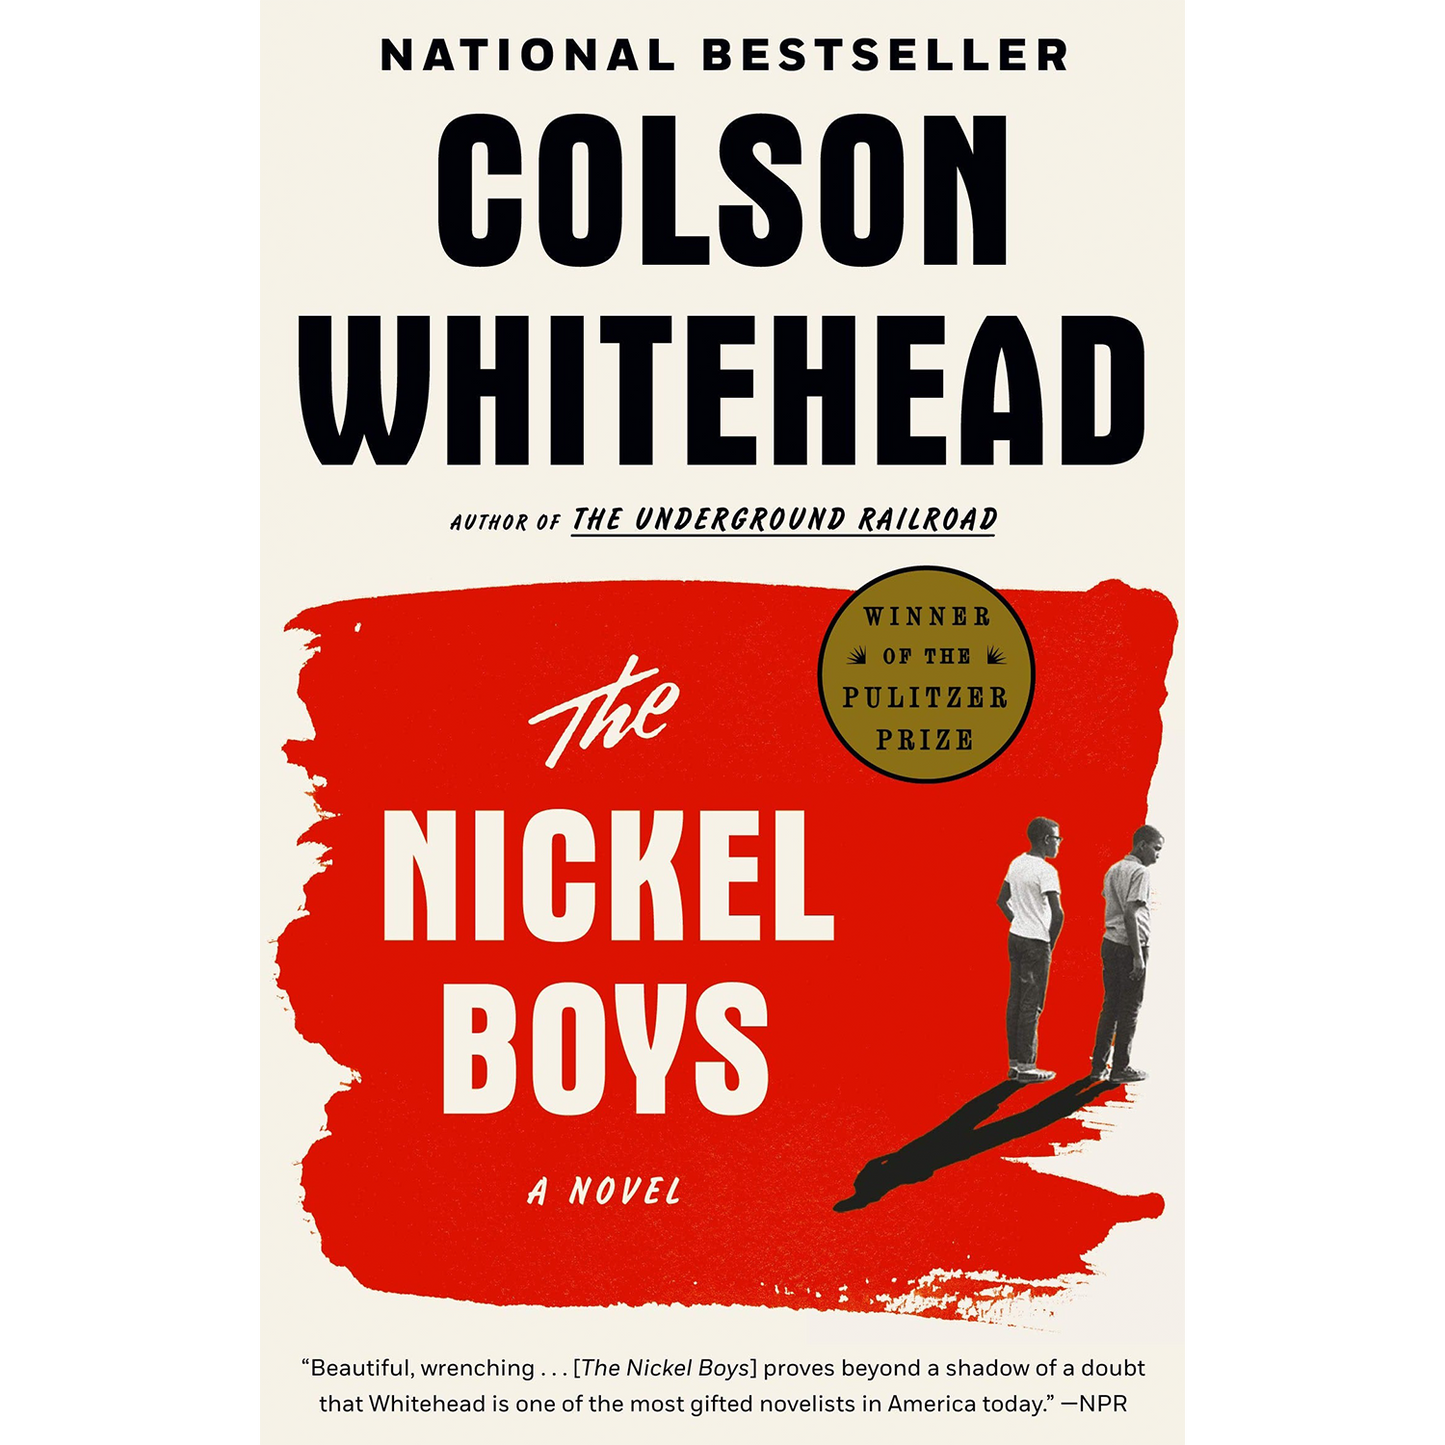 The Nickel Boys: A Novel by Colson Whitehead (Paperback)